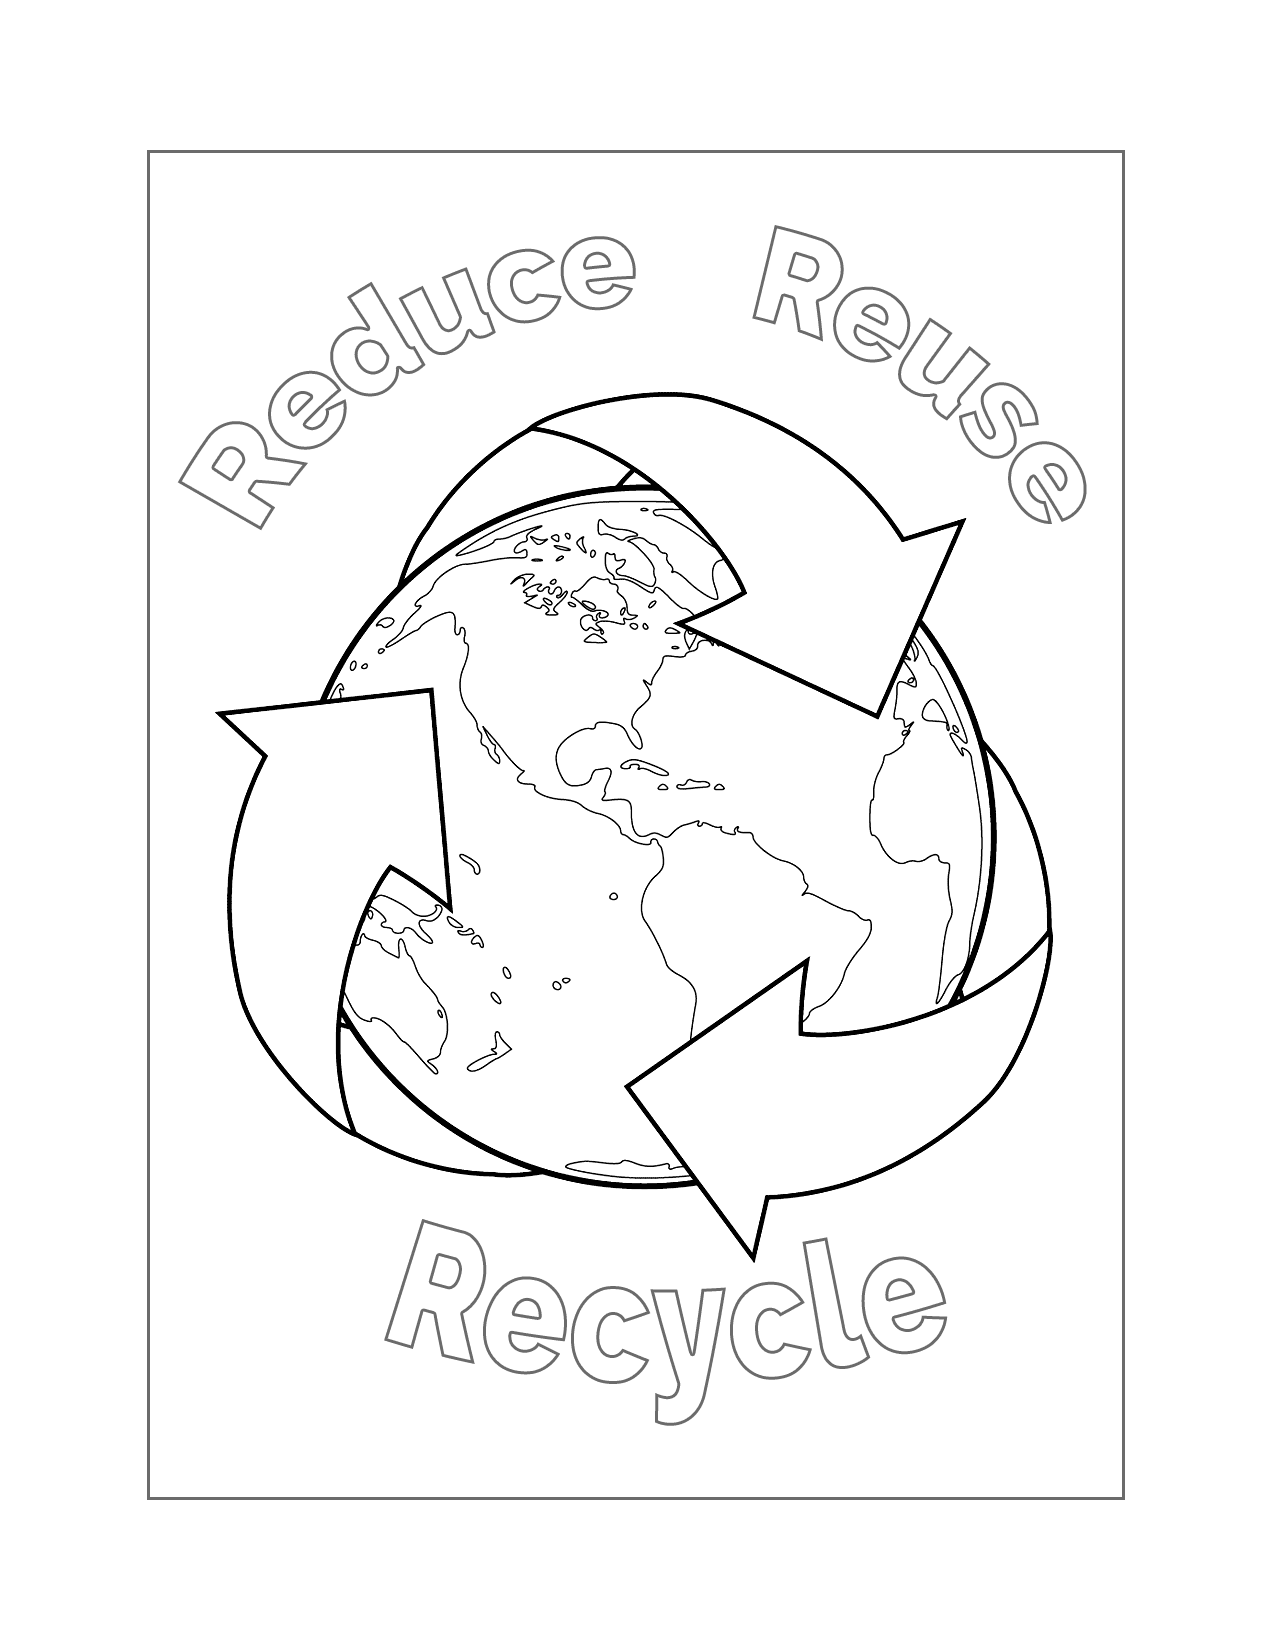 Reduce Reuse Recycle Coloring Page